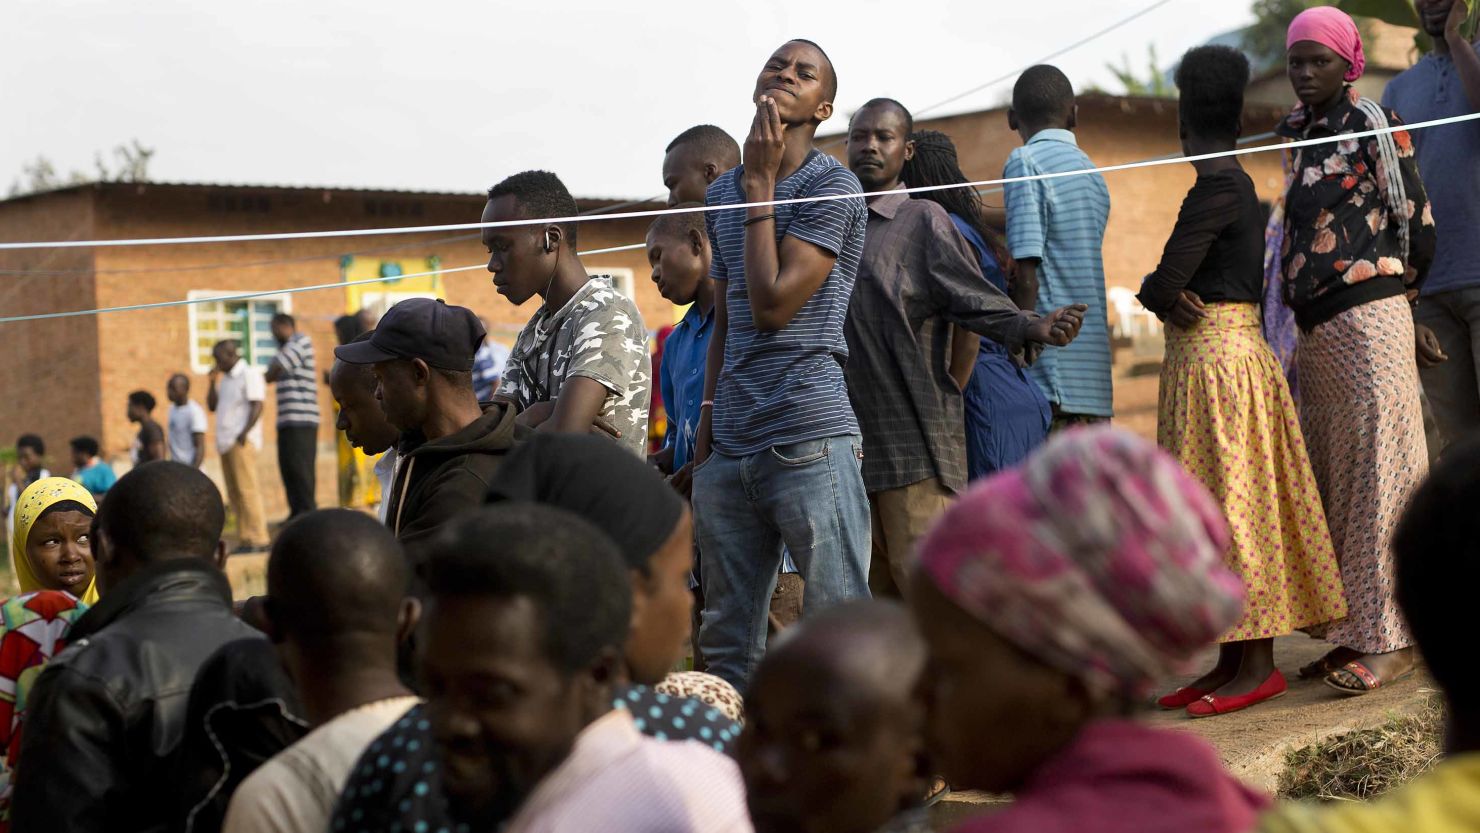 Rwandans line up to vote at a polling station in Rwanda's capital, Kigali, on Friday.